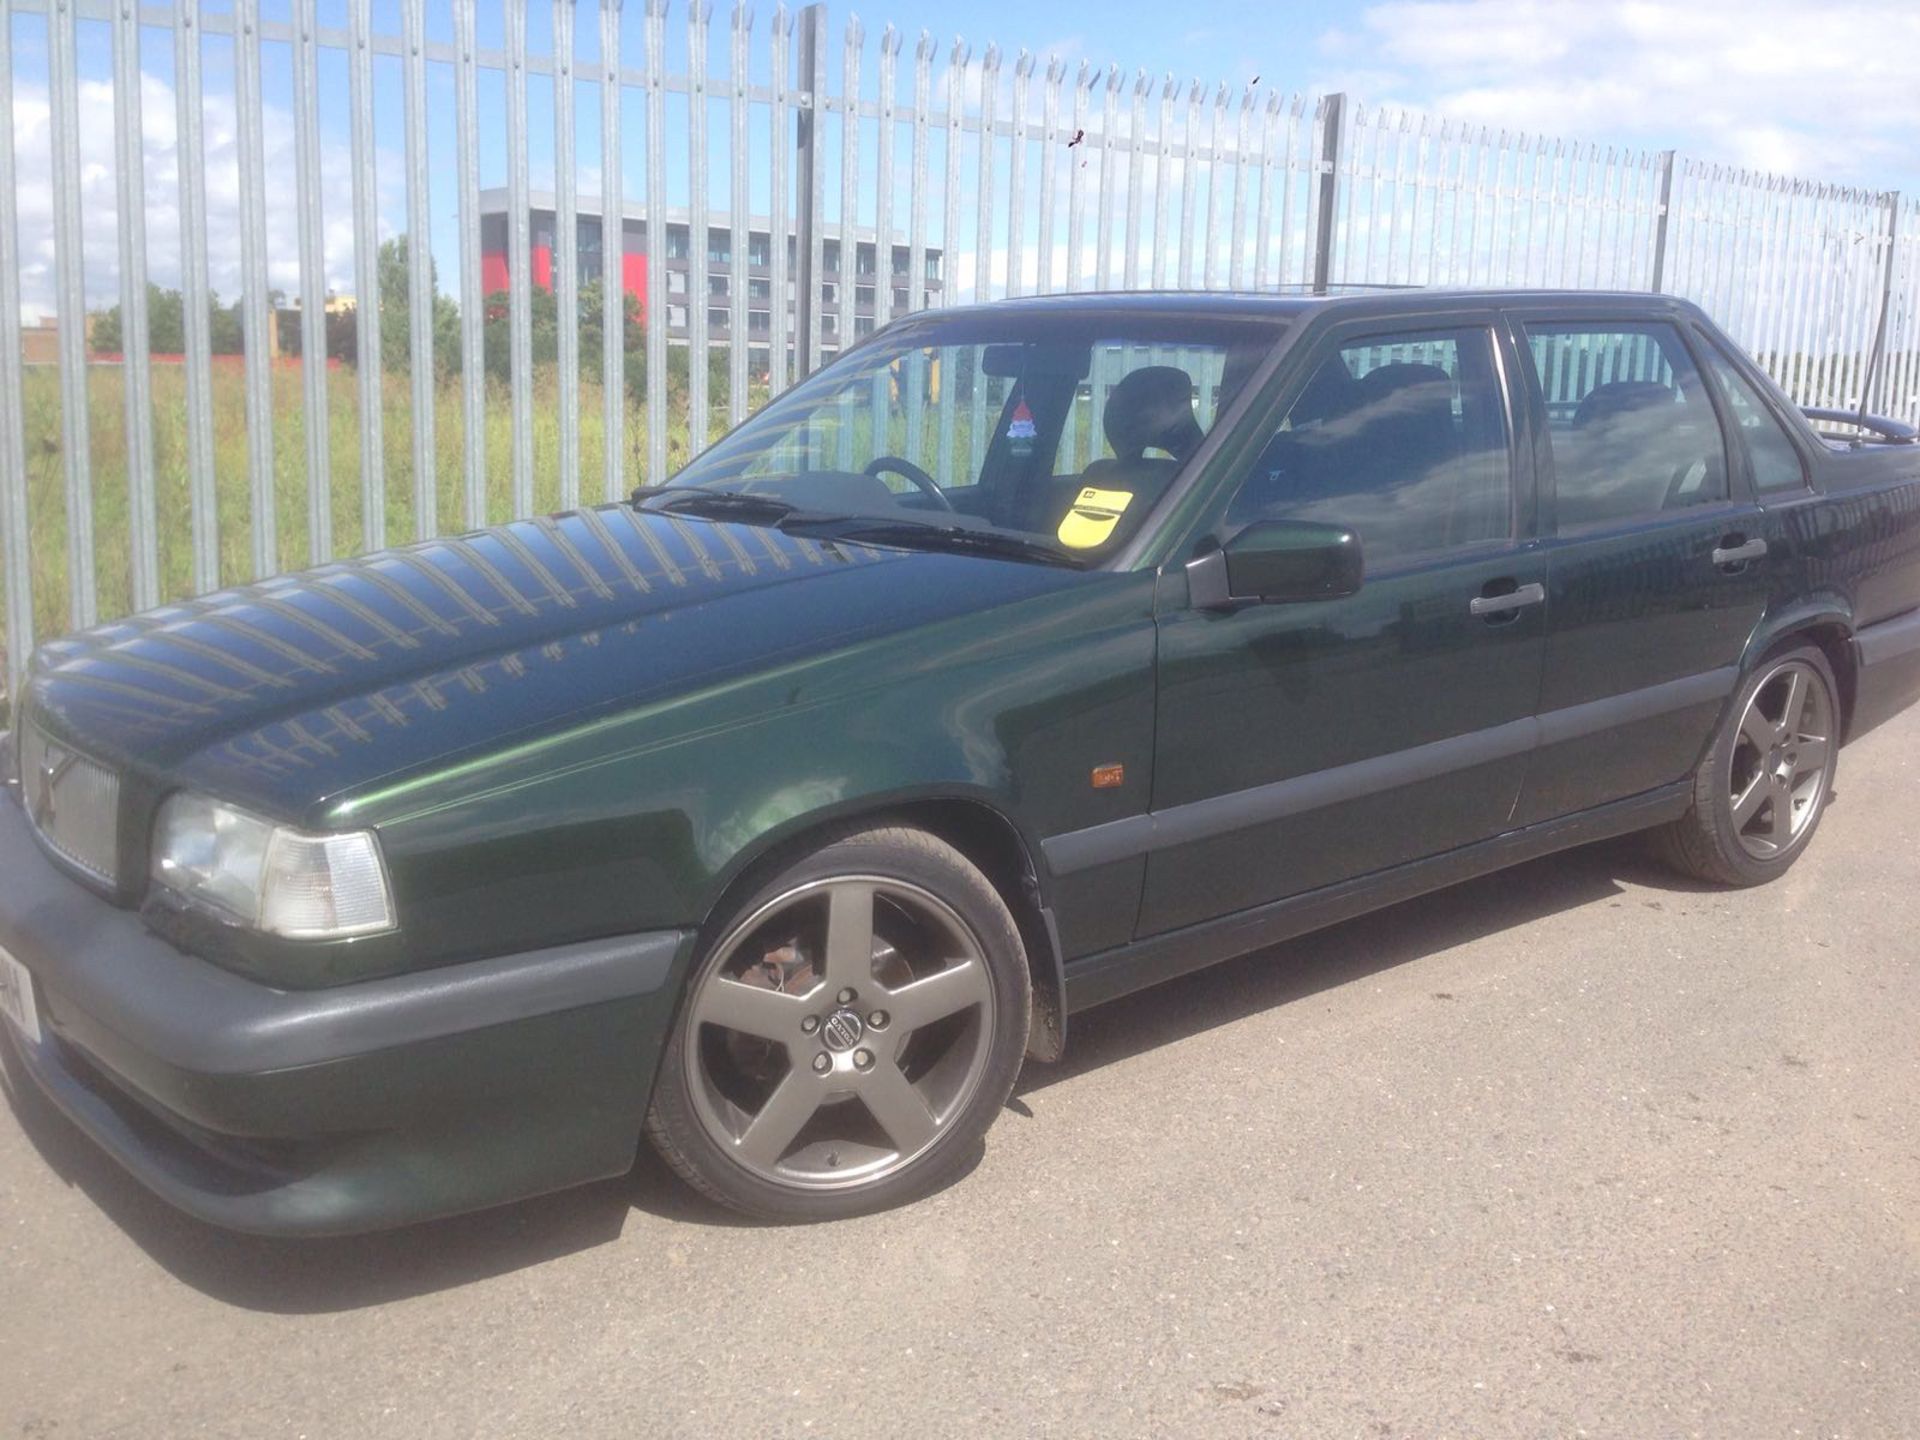 VOLVO T5-R saloon auto, 1995/N. olive green, 2 previous owners from new. - Image 2 of 20